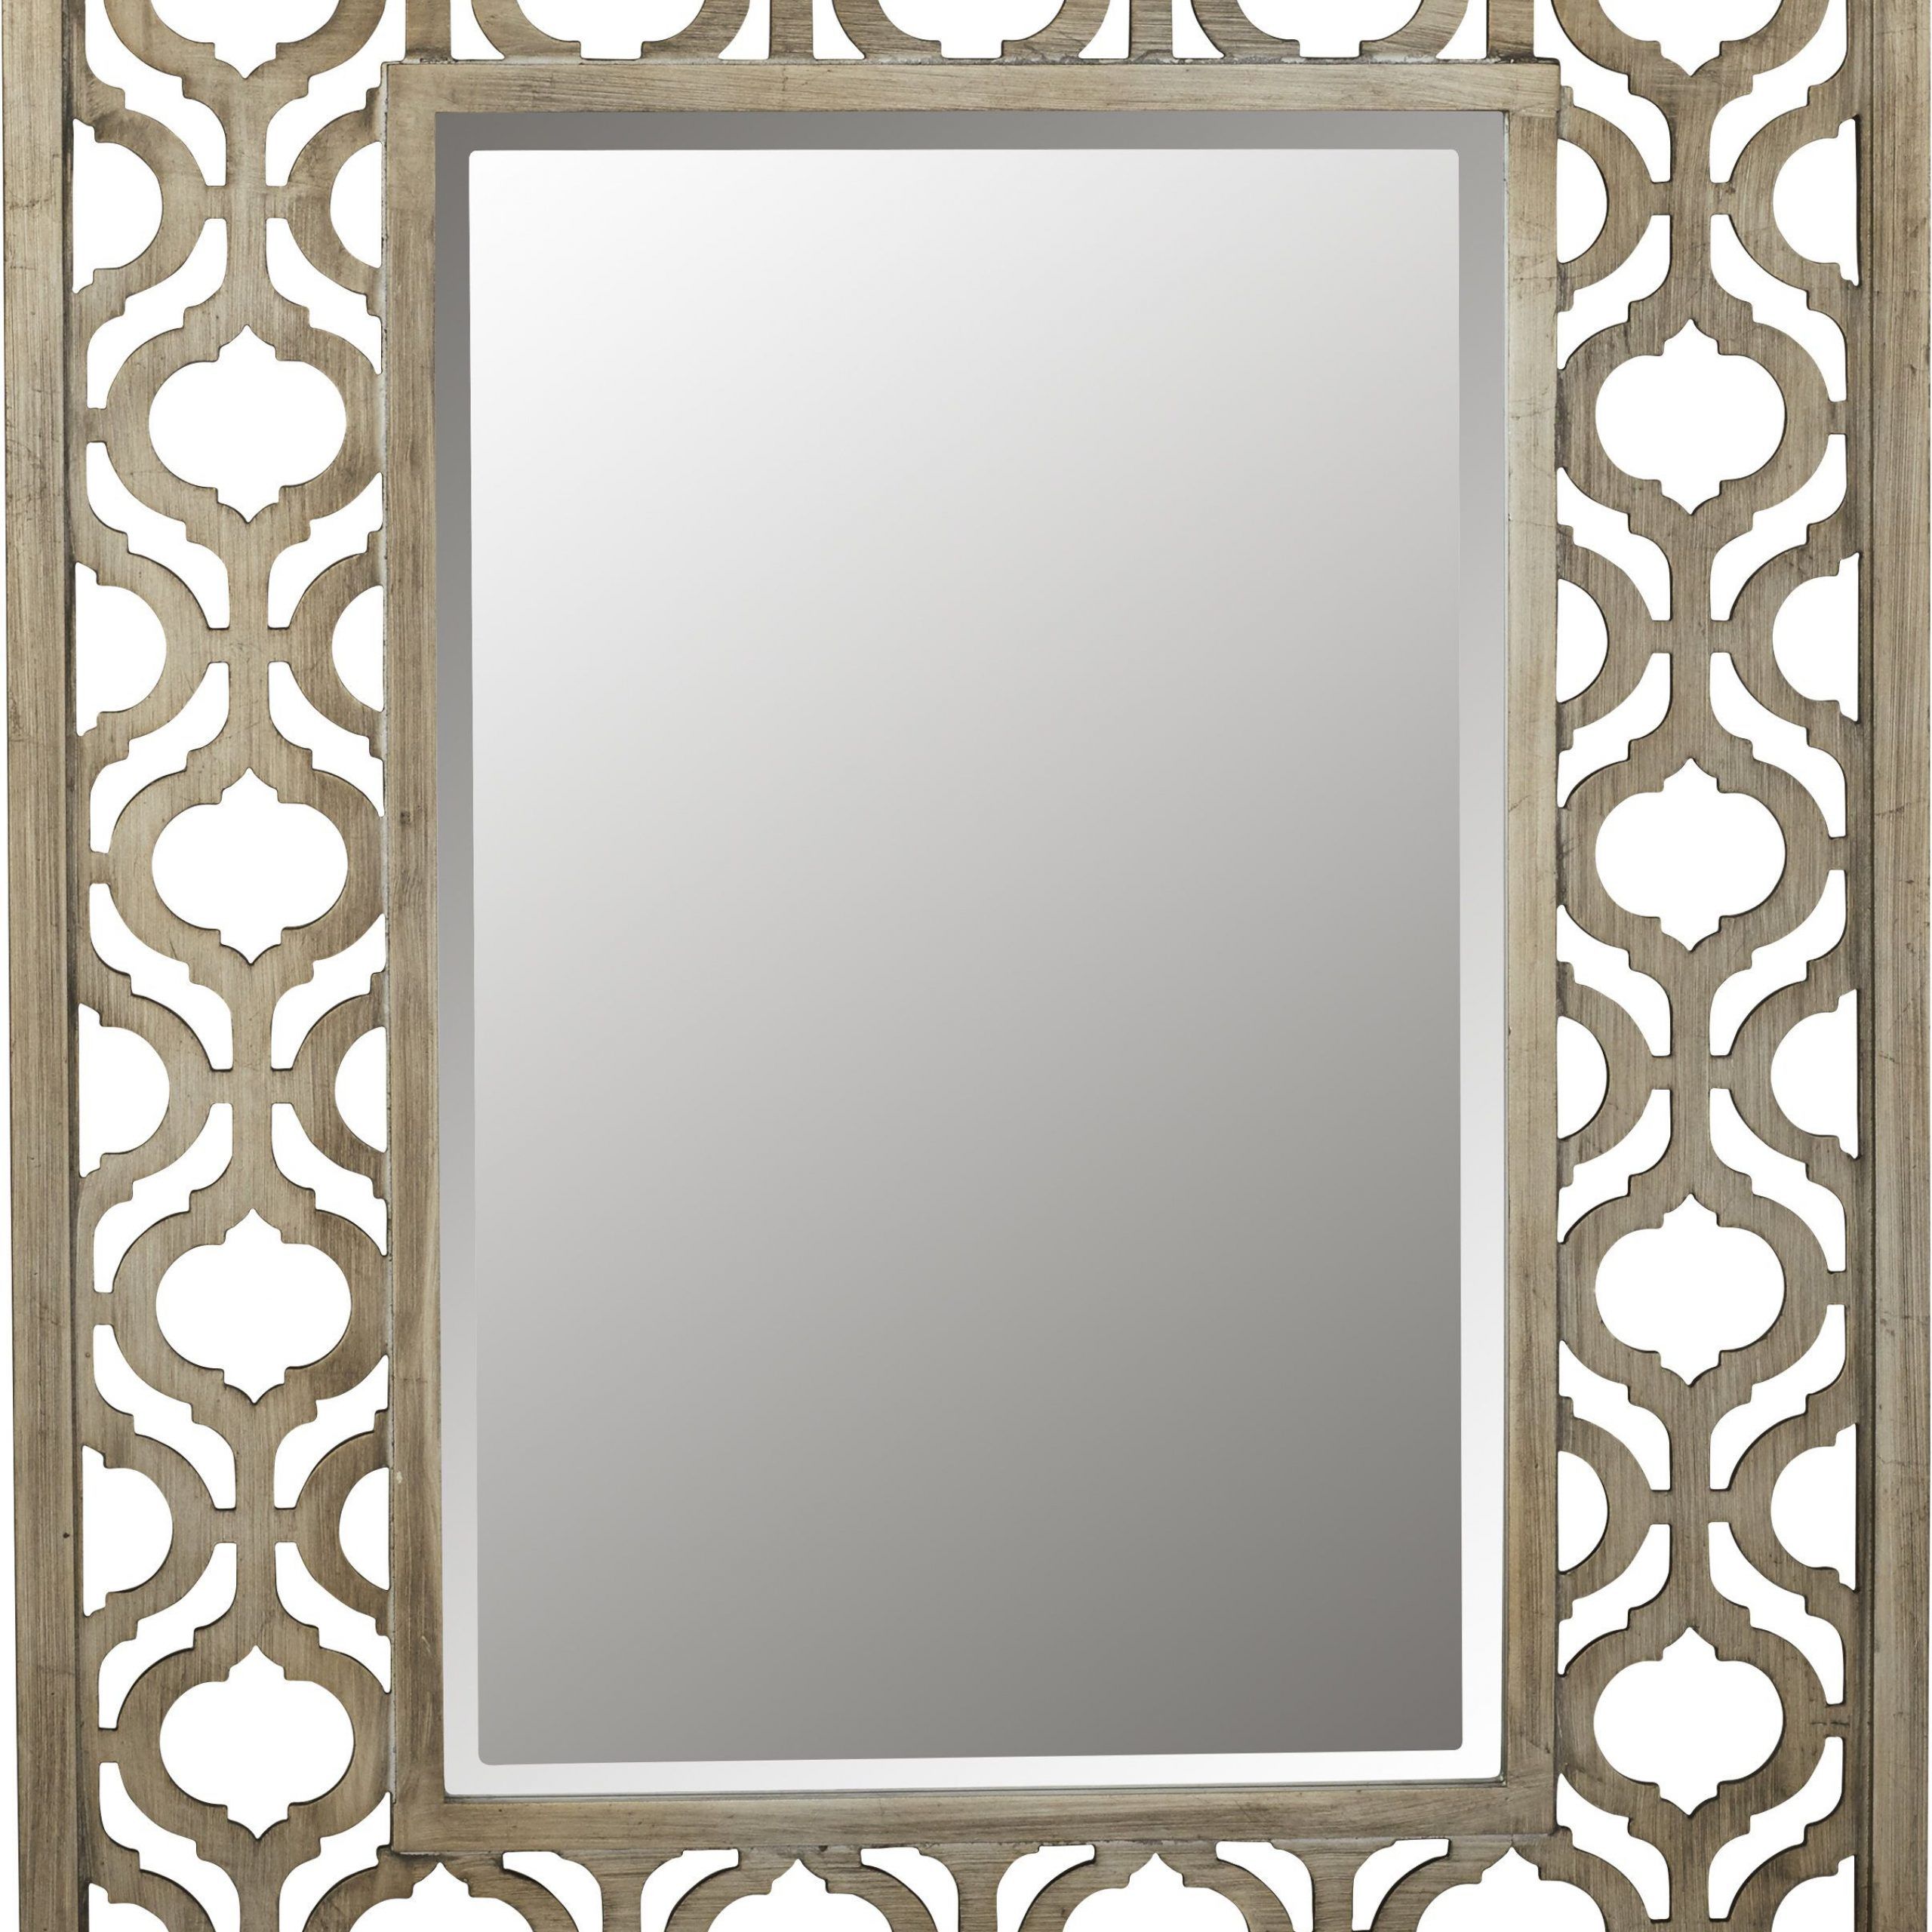 Ulus Accent Mirror | Traditional Wall Mirrors, Oversized Wall Mirrors Within Ulus Accent Mirrors (View 6 of 15)